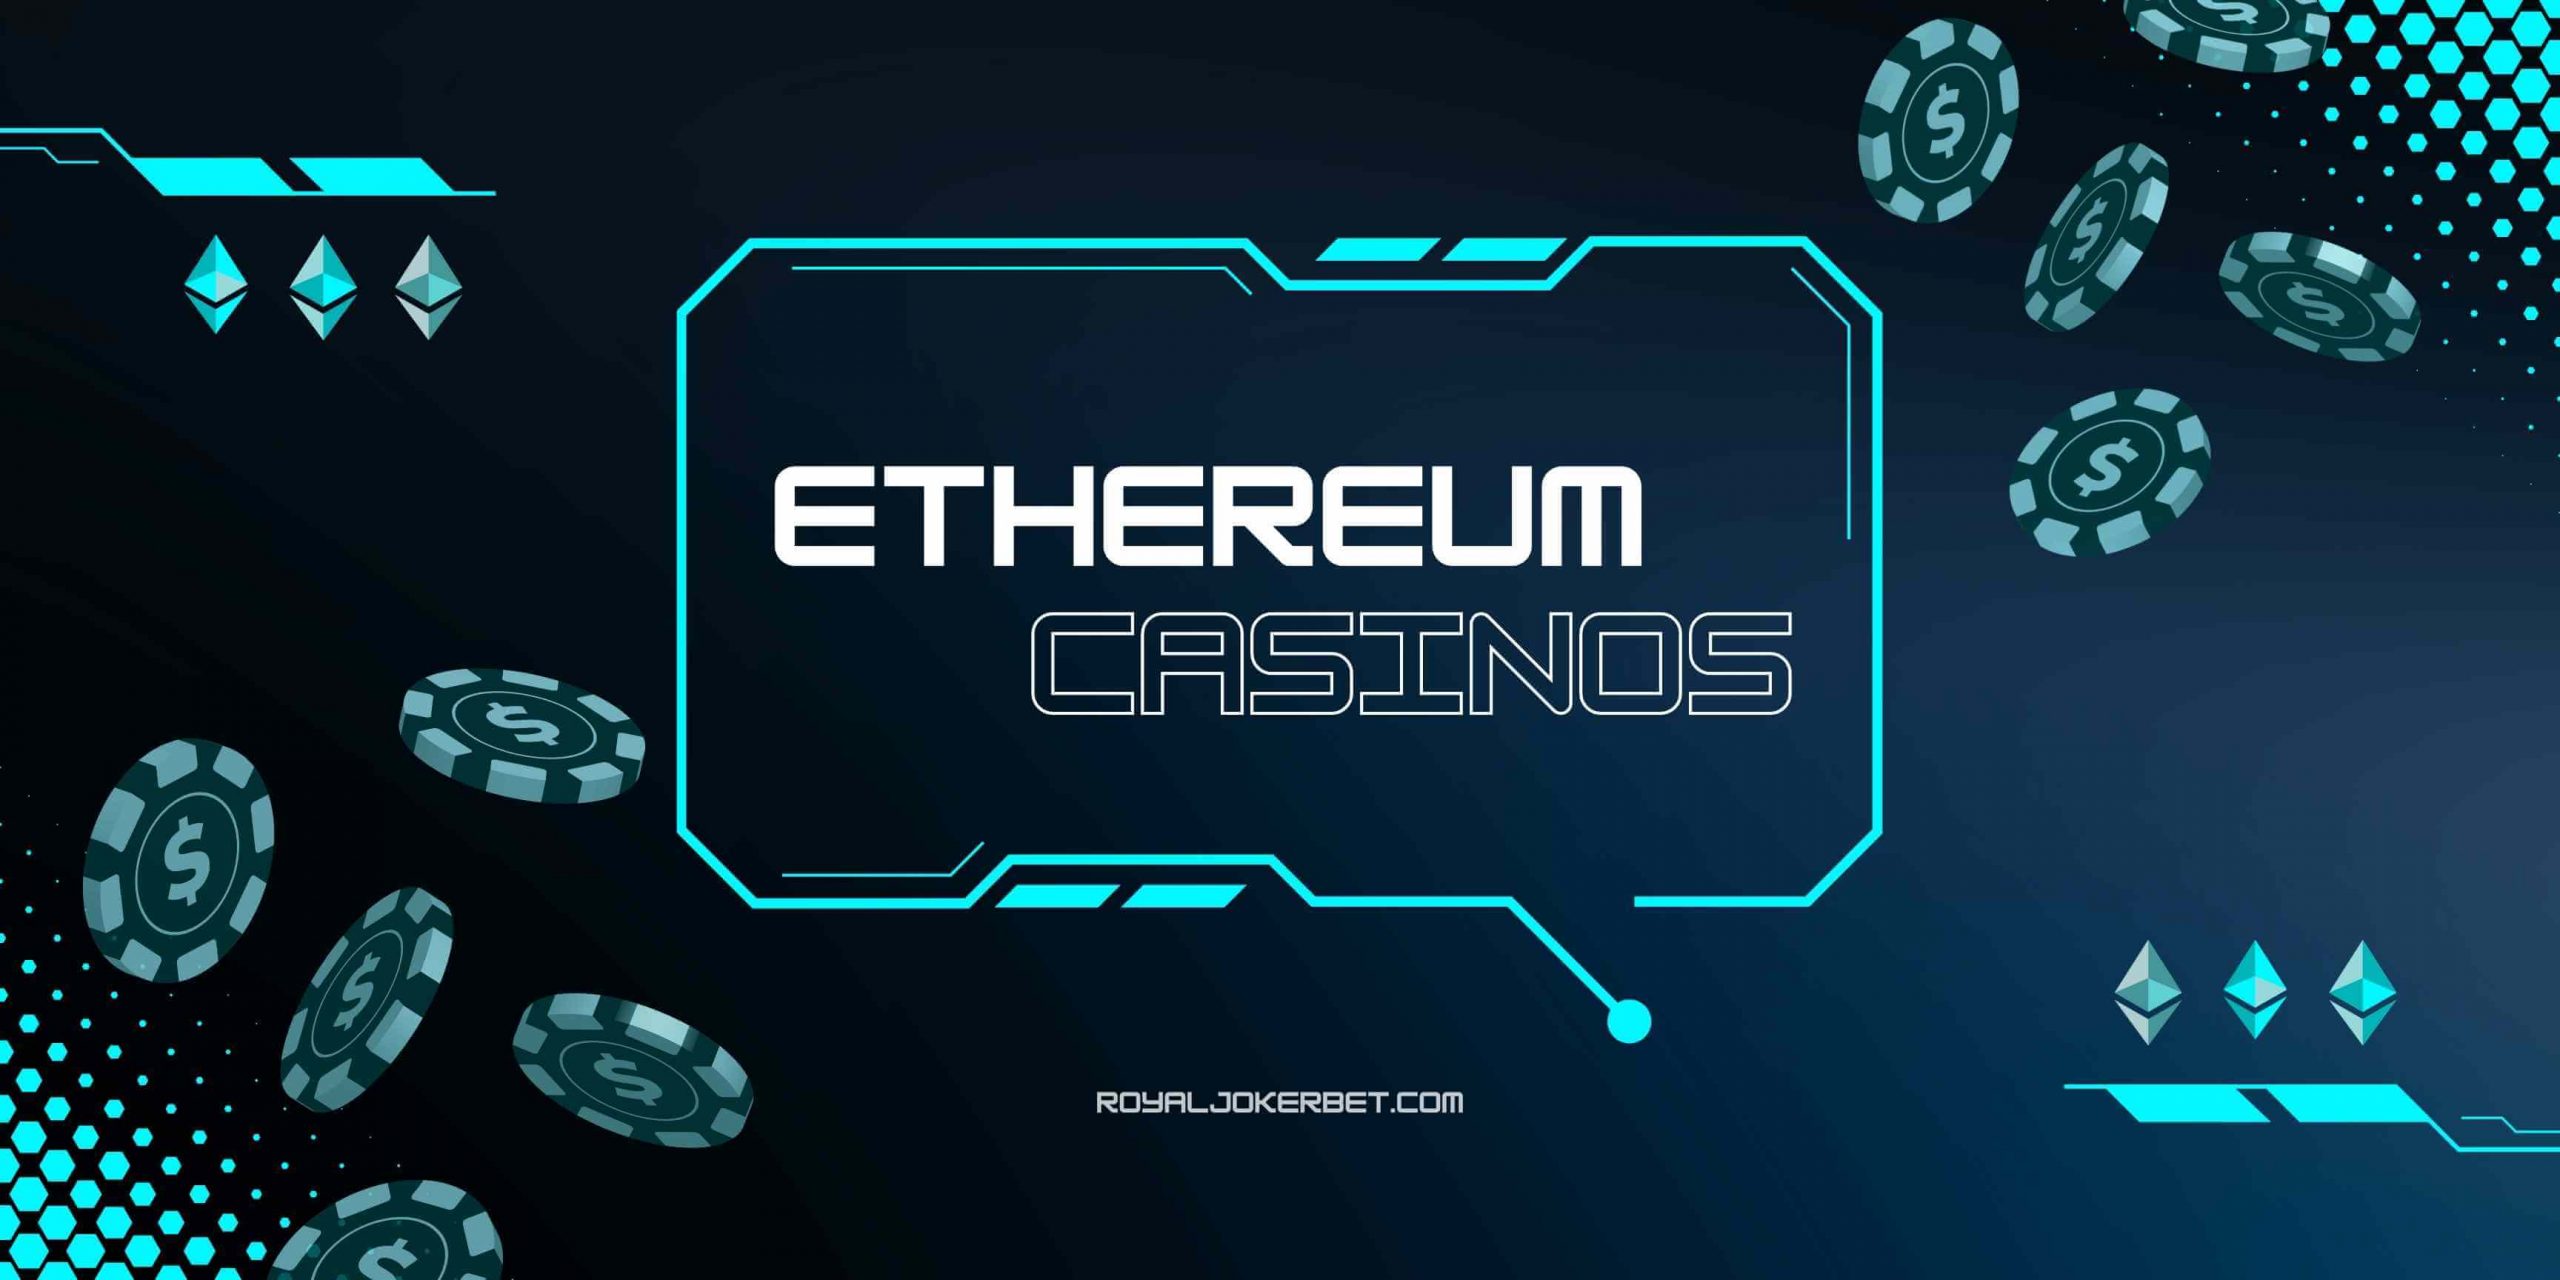 Introducing The Simple Way To ethereum online casino